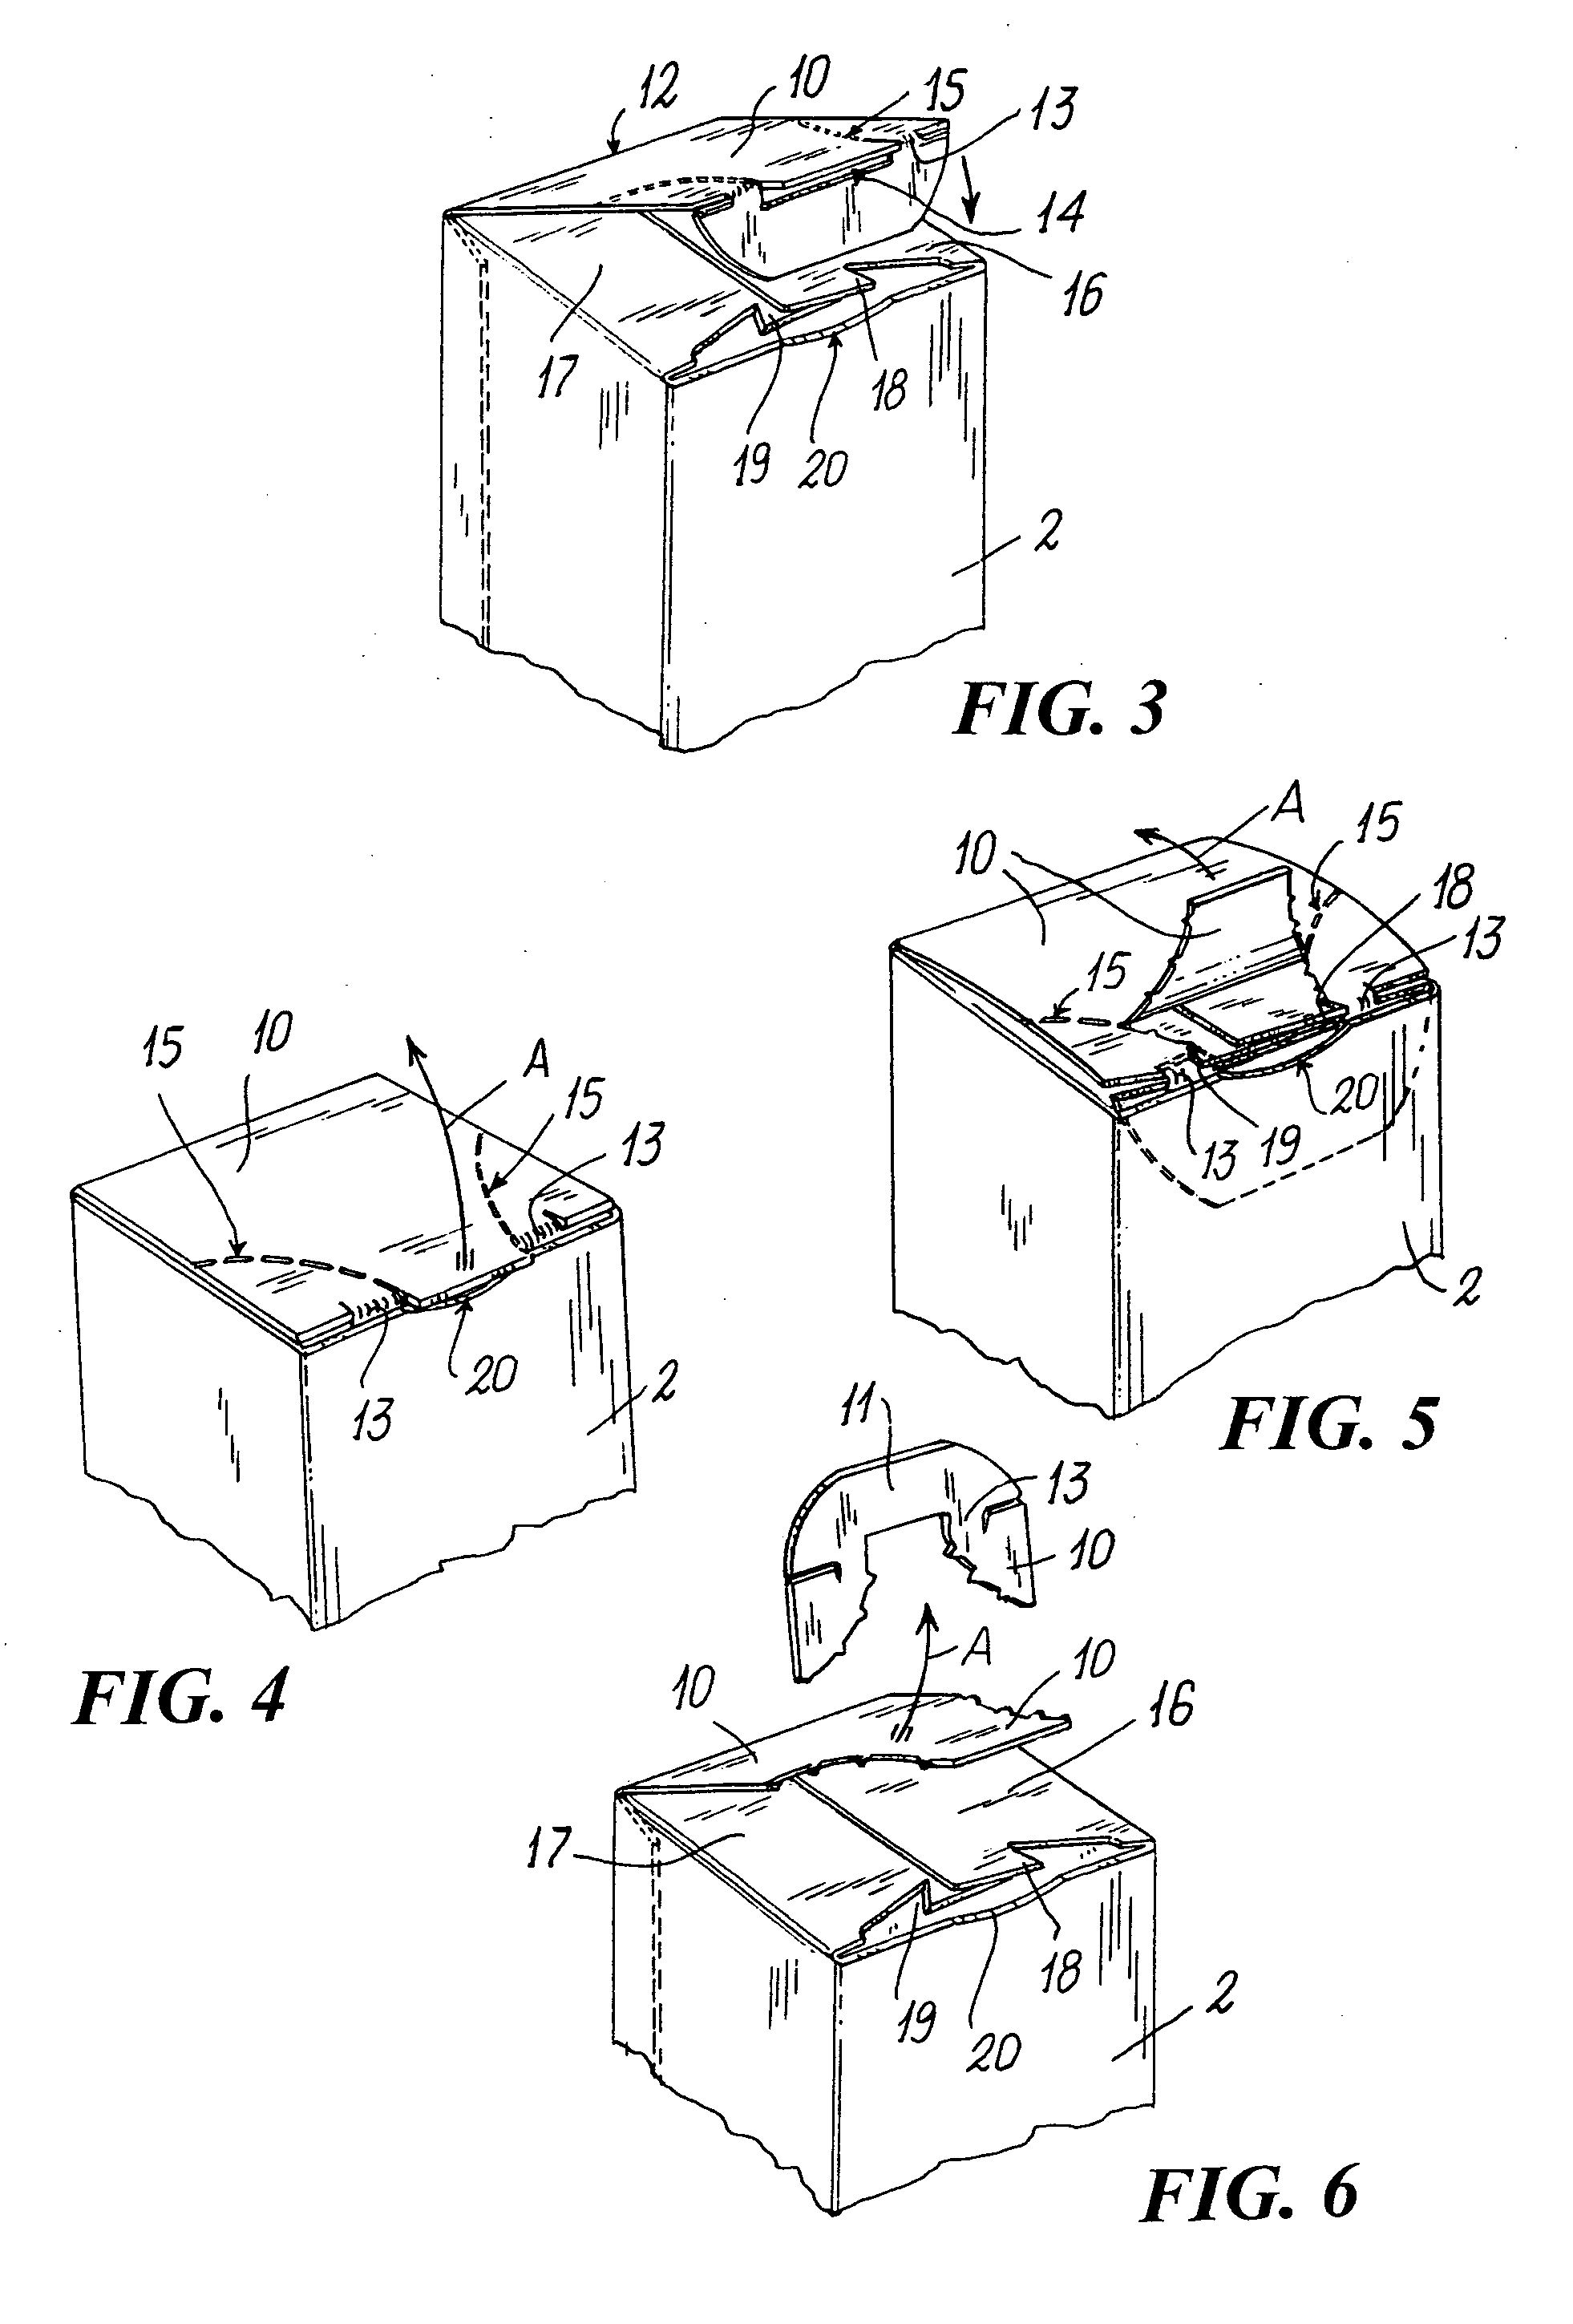 Box with base resistant to opening and having its portions breakable to prevent it from being reclosed after its initial opening